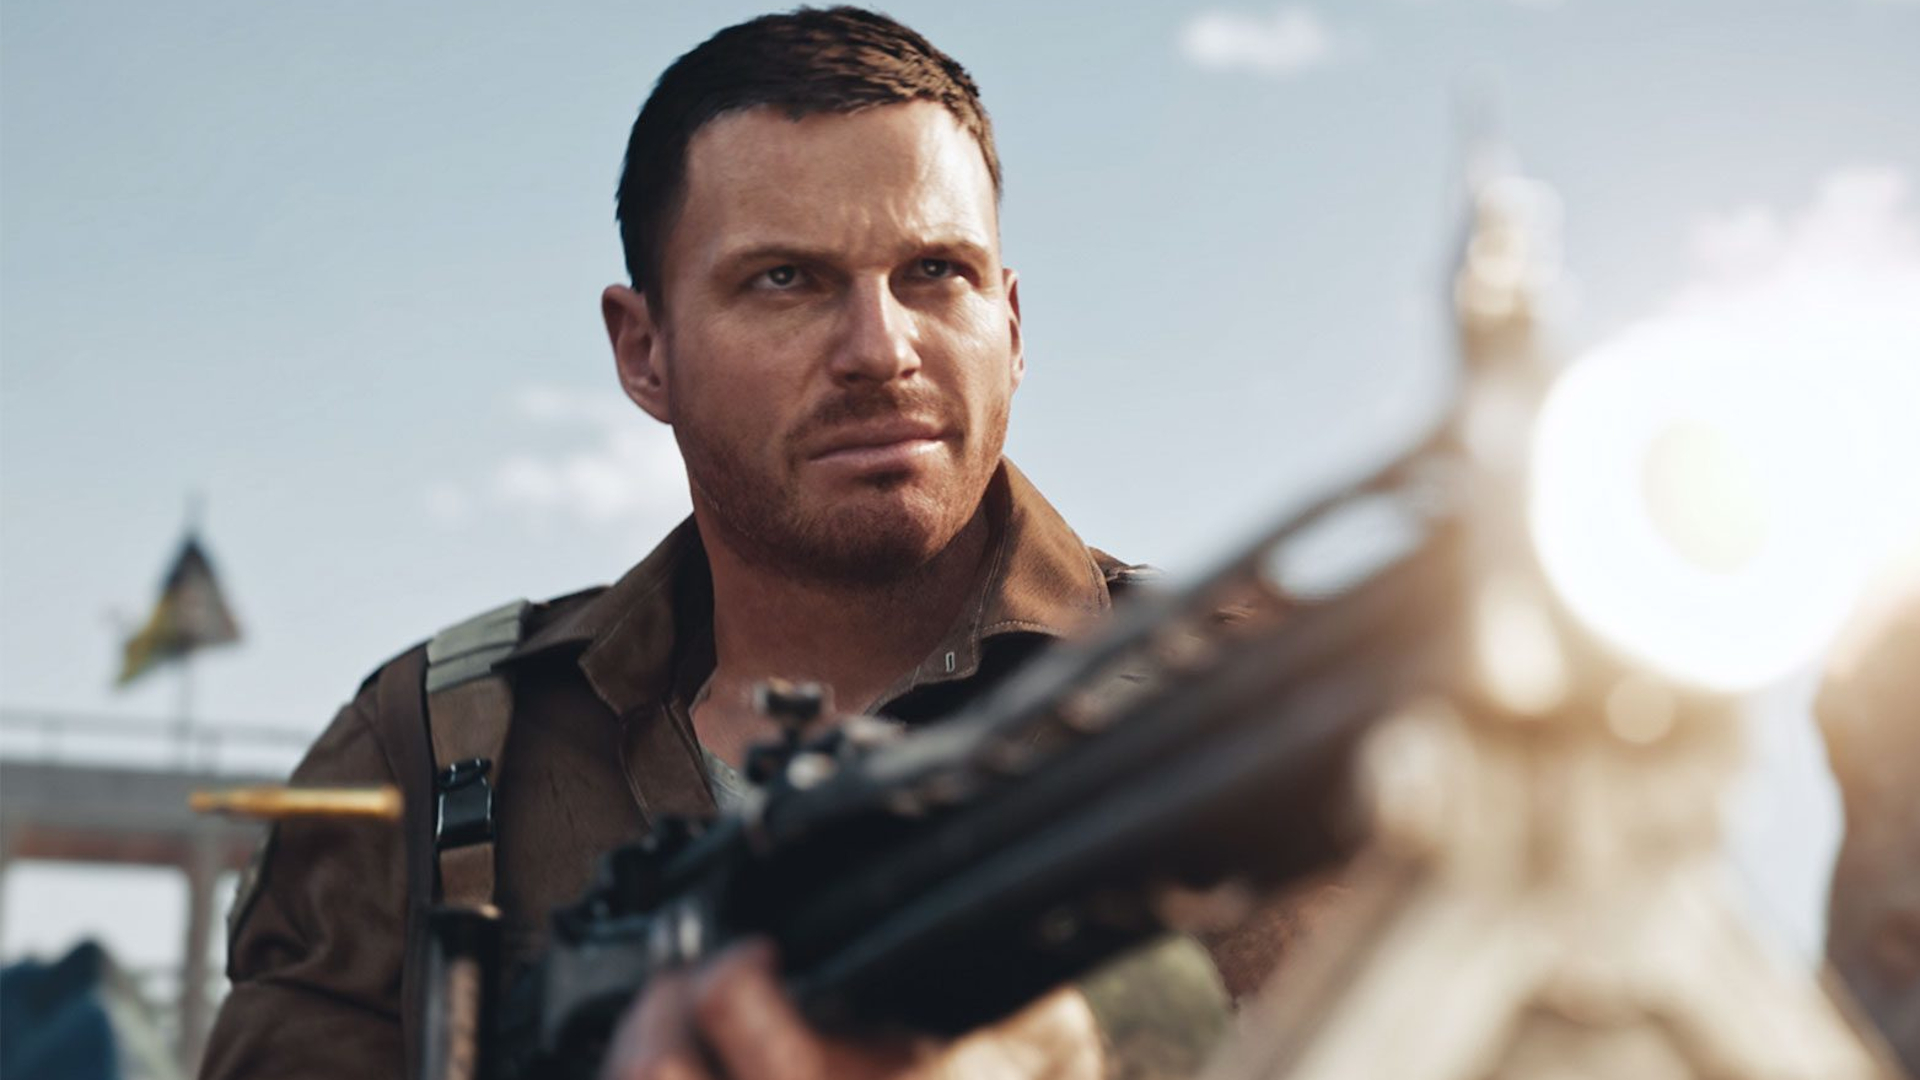  Microsoft's latest Activision acquisition defense: What if Call of Duty sucked? 